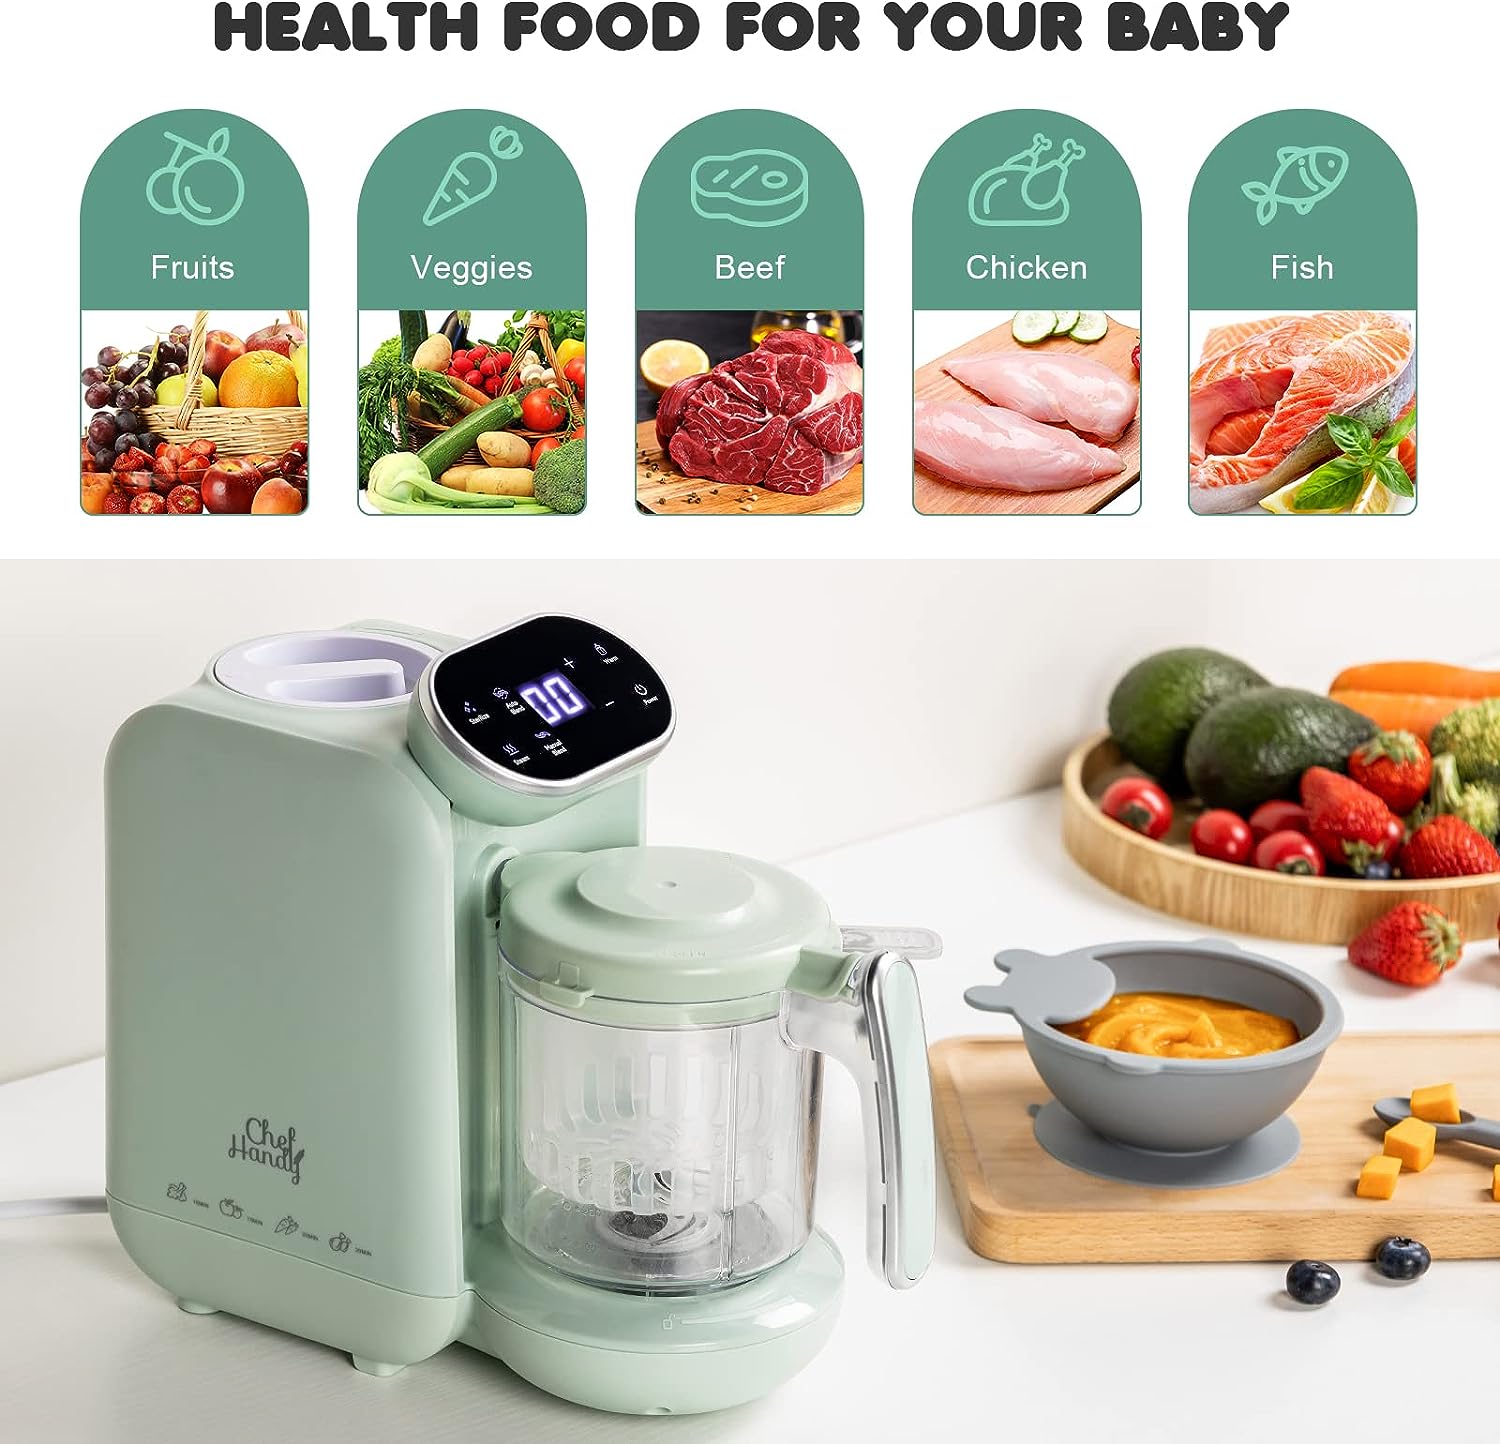 CHEFHANDY 5-in-1 baby food processor, baby food maker, baby food preparer, baby food preparation, bottle warmer - baby steaming, mixing, warming up - Baby Bliss